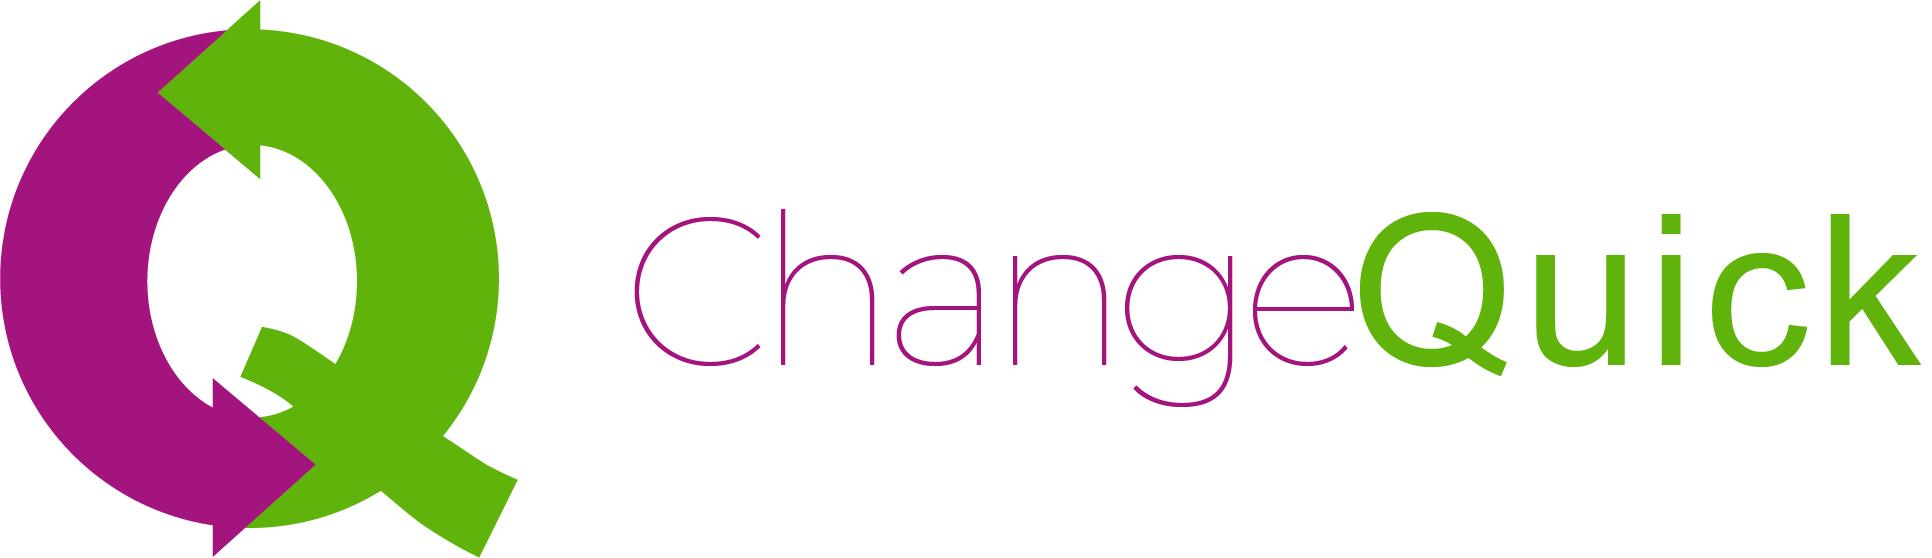 ChangeQuick Logo - transparent with word mark